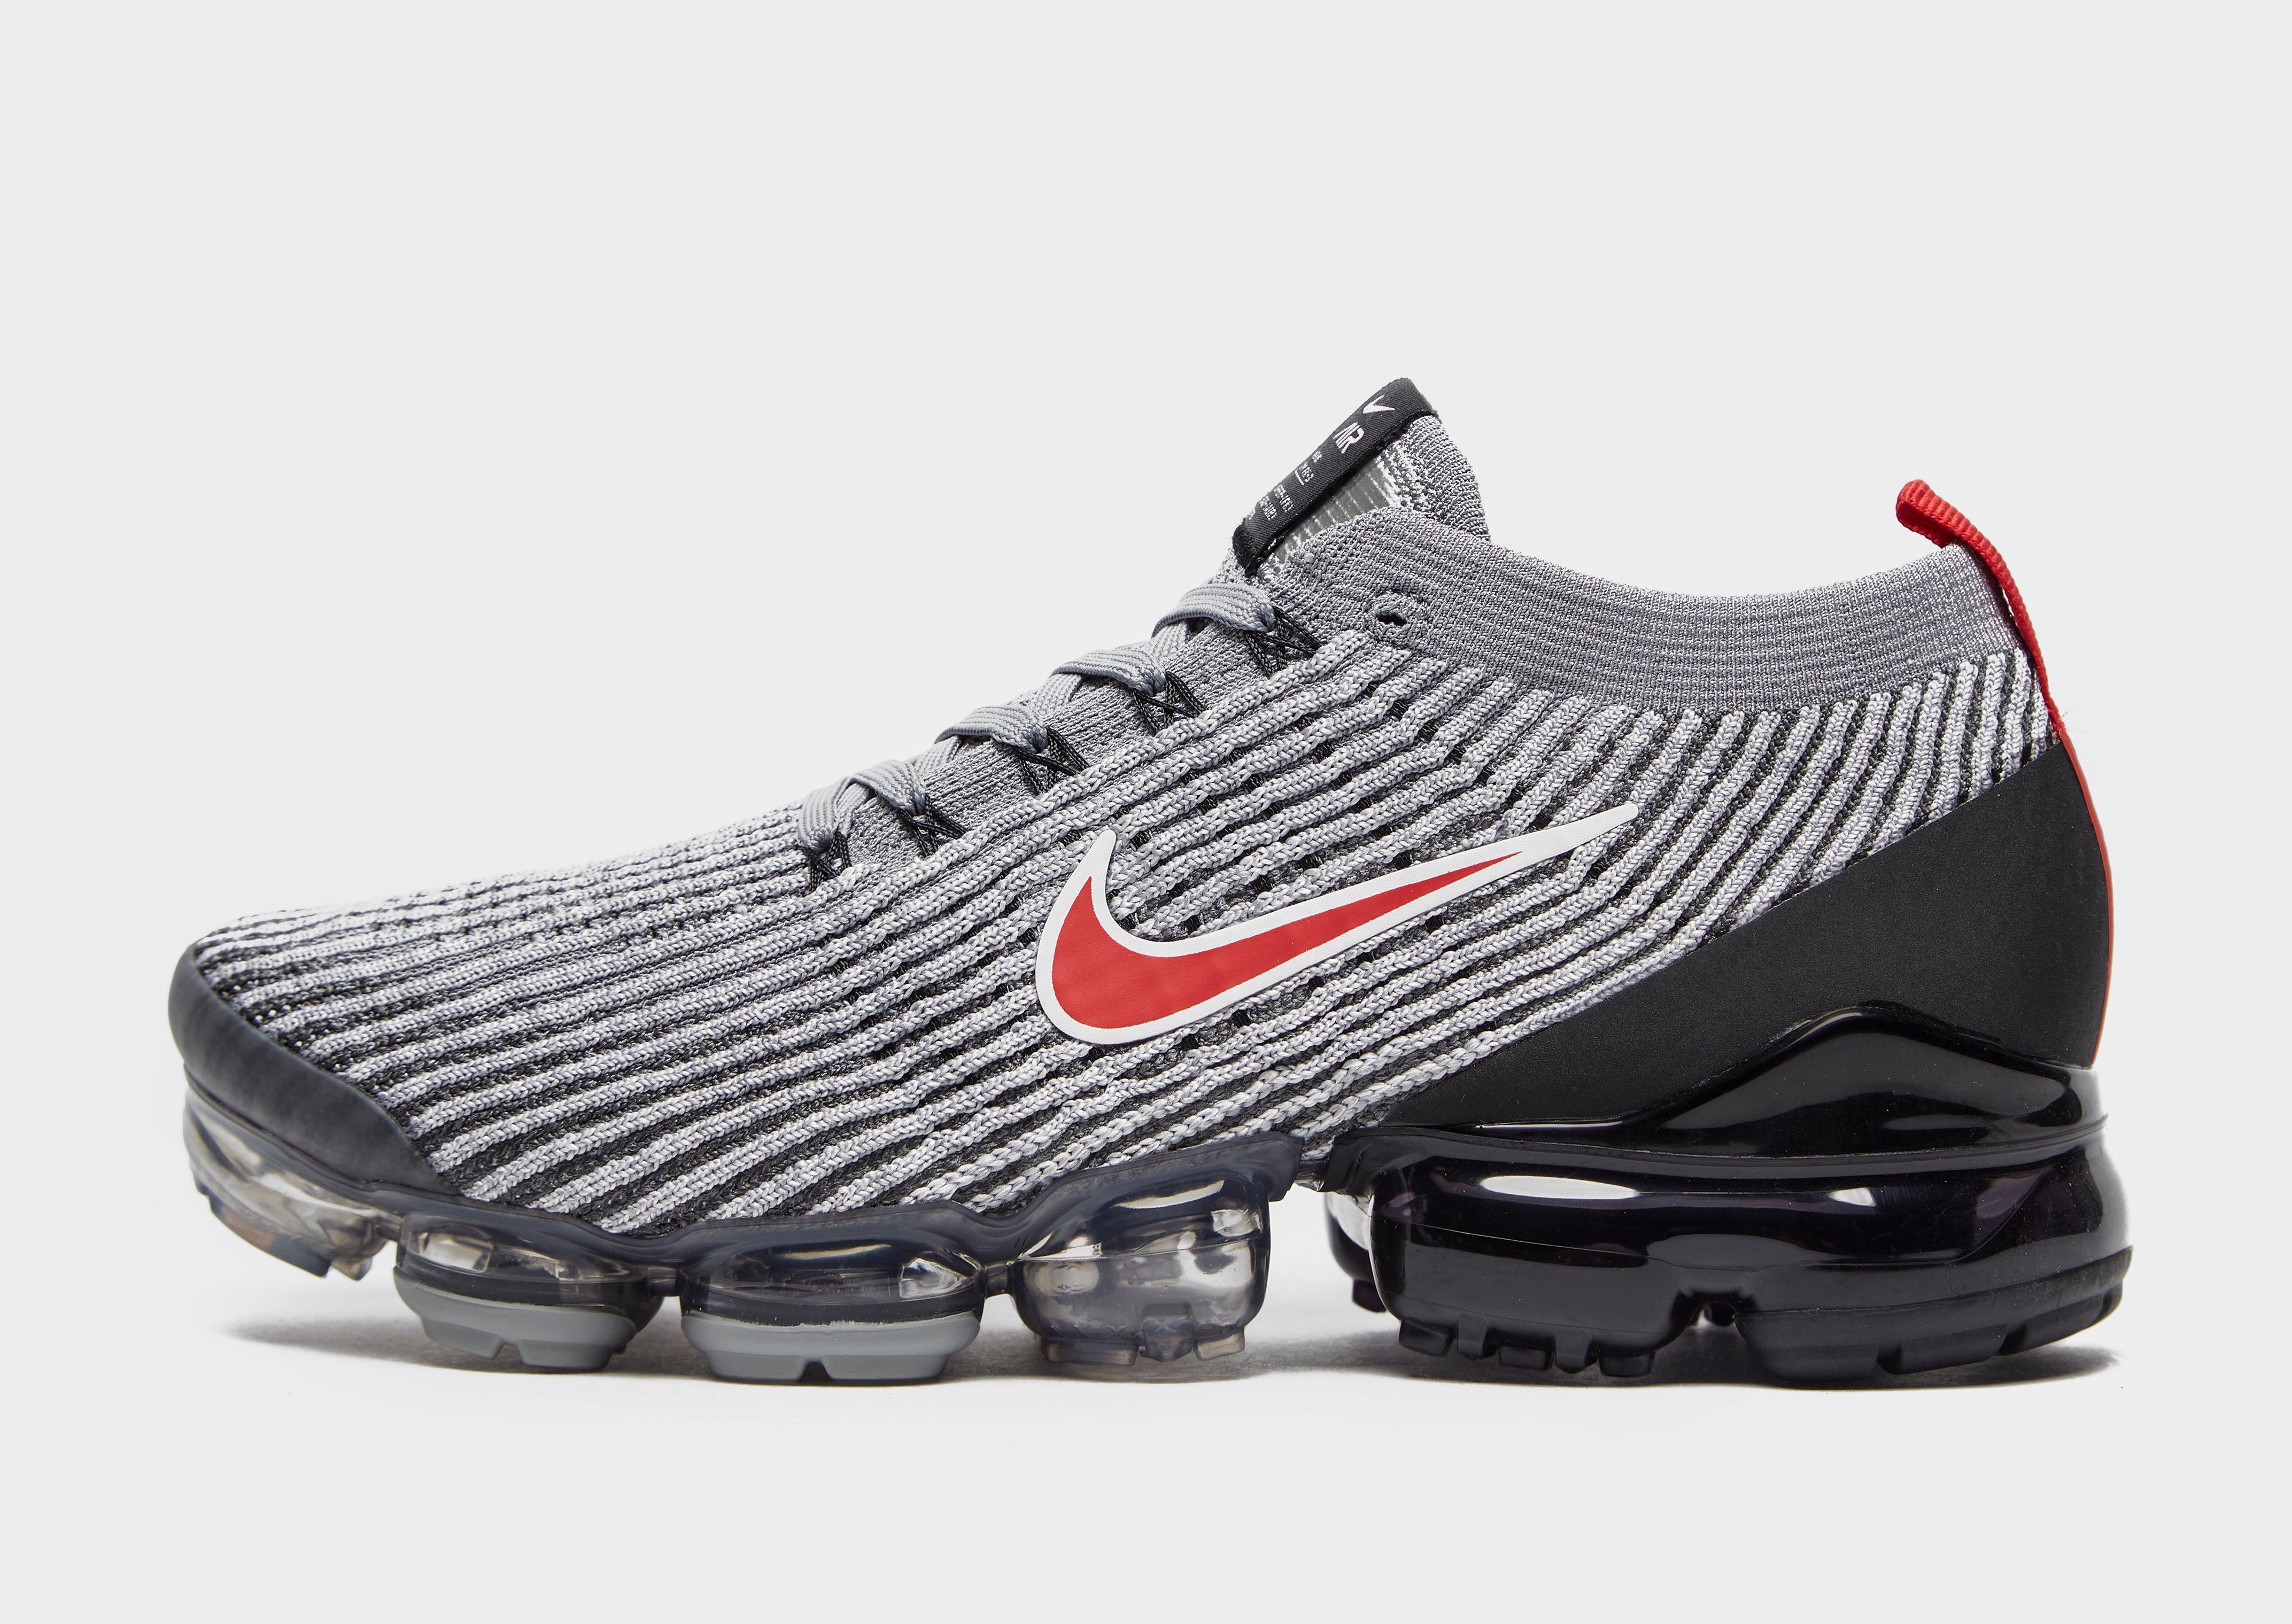 Nike Vapormax Plus Chicago CW6974 100 in 2020 Red and